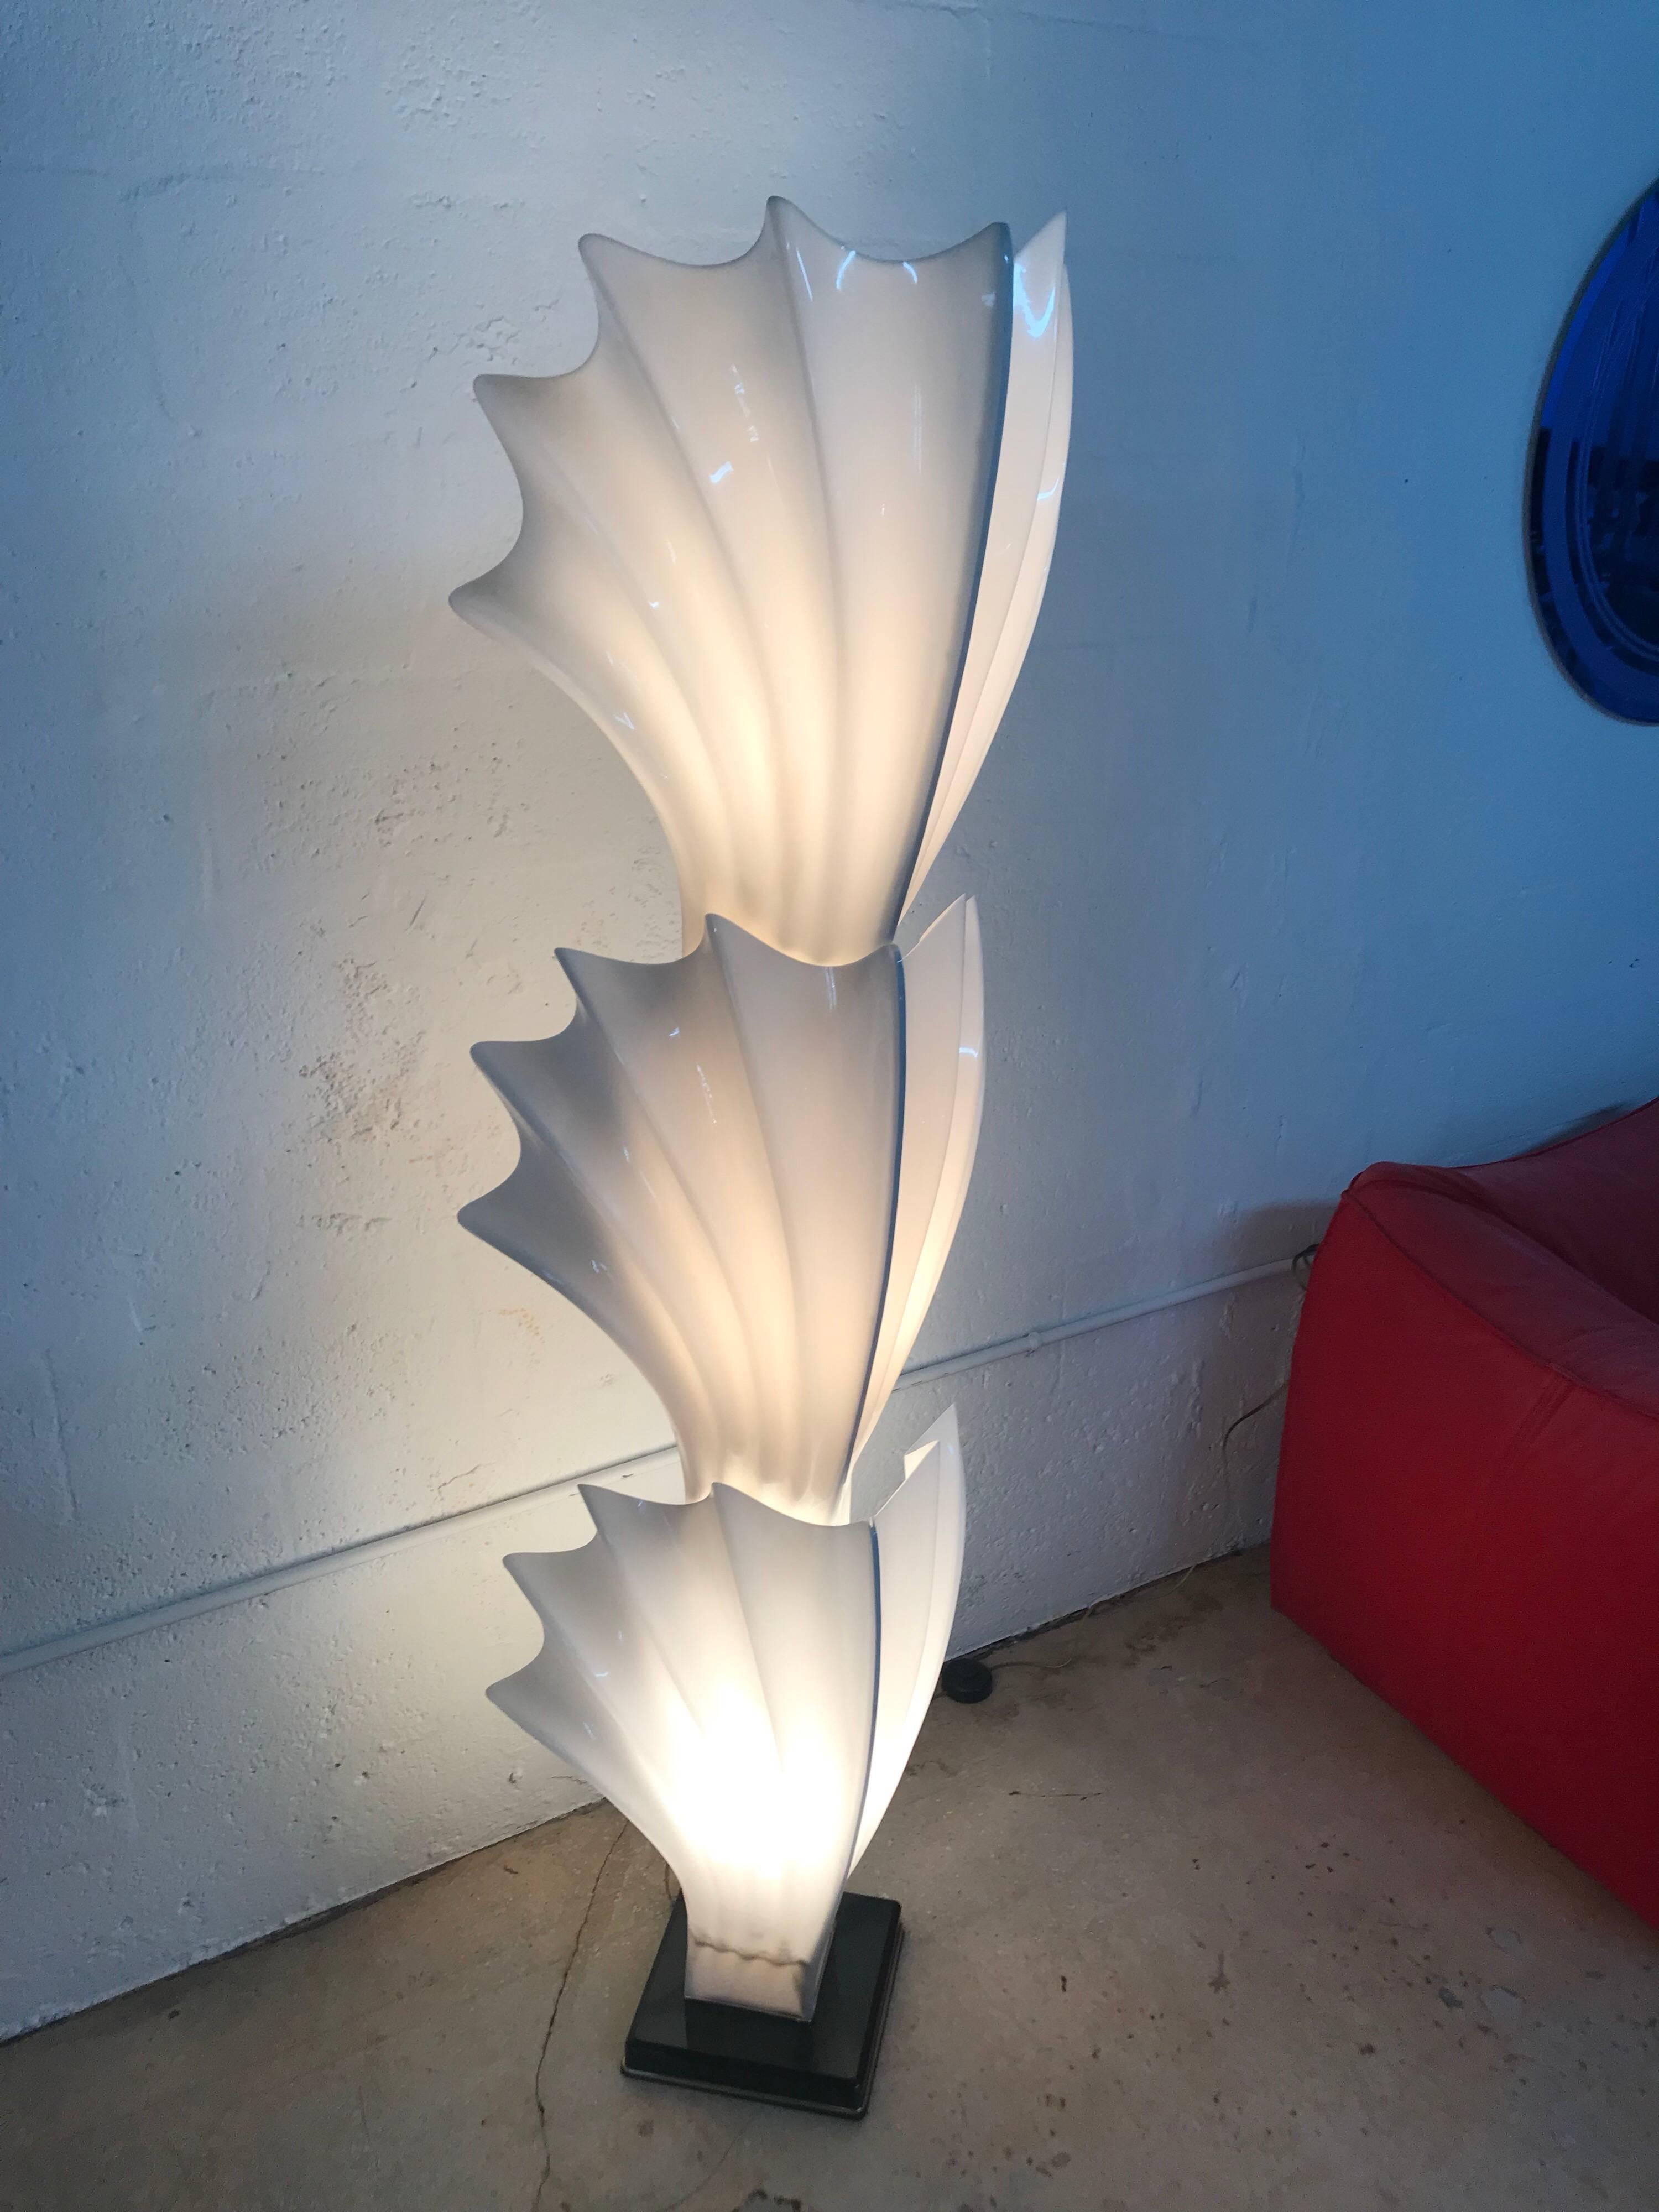 Mid-Century Modern Rare Post Modern Lucite Shell Motif Floor Lamp By Rougier, Canada, circa 1980s.